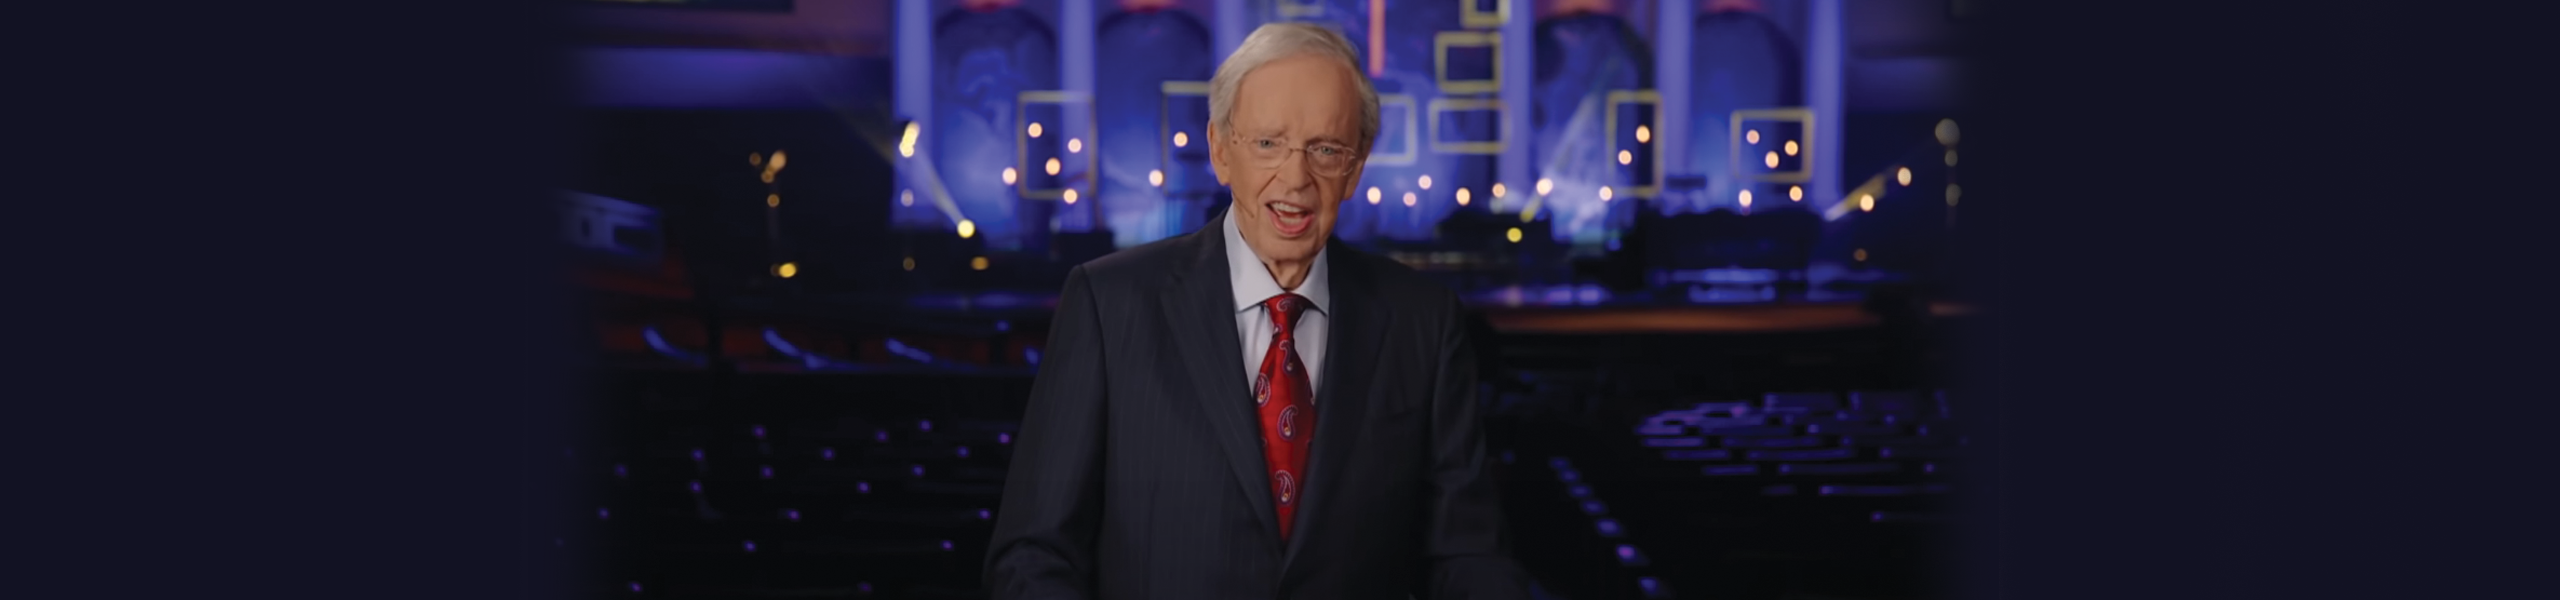 COVID 19 Resources | Charles Stanley